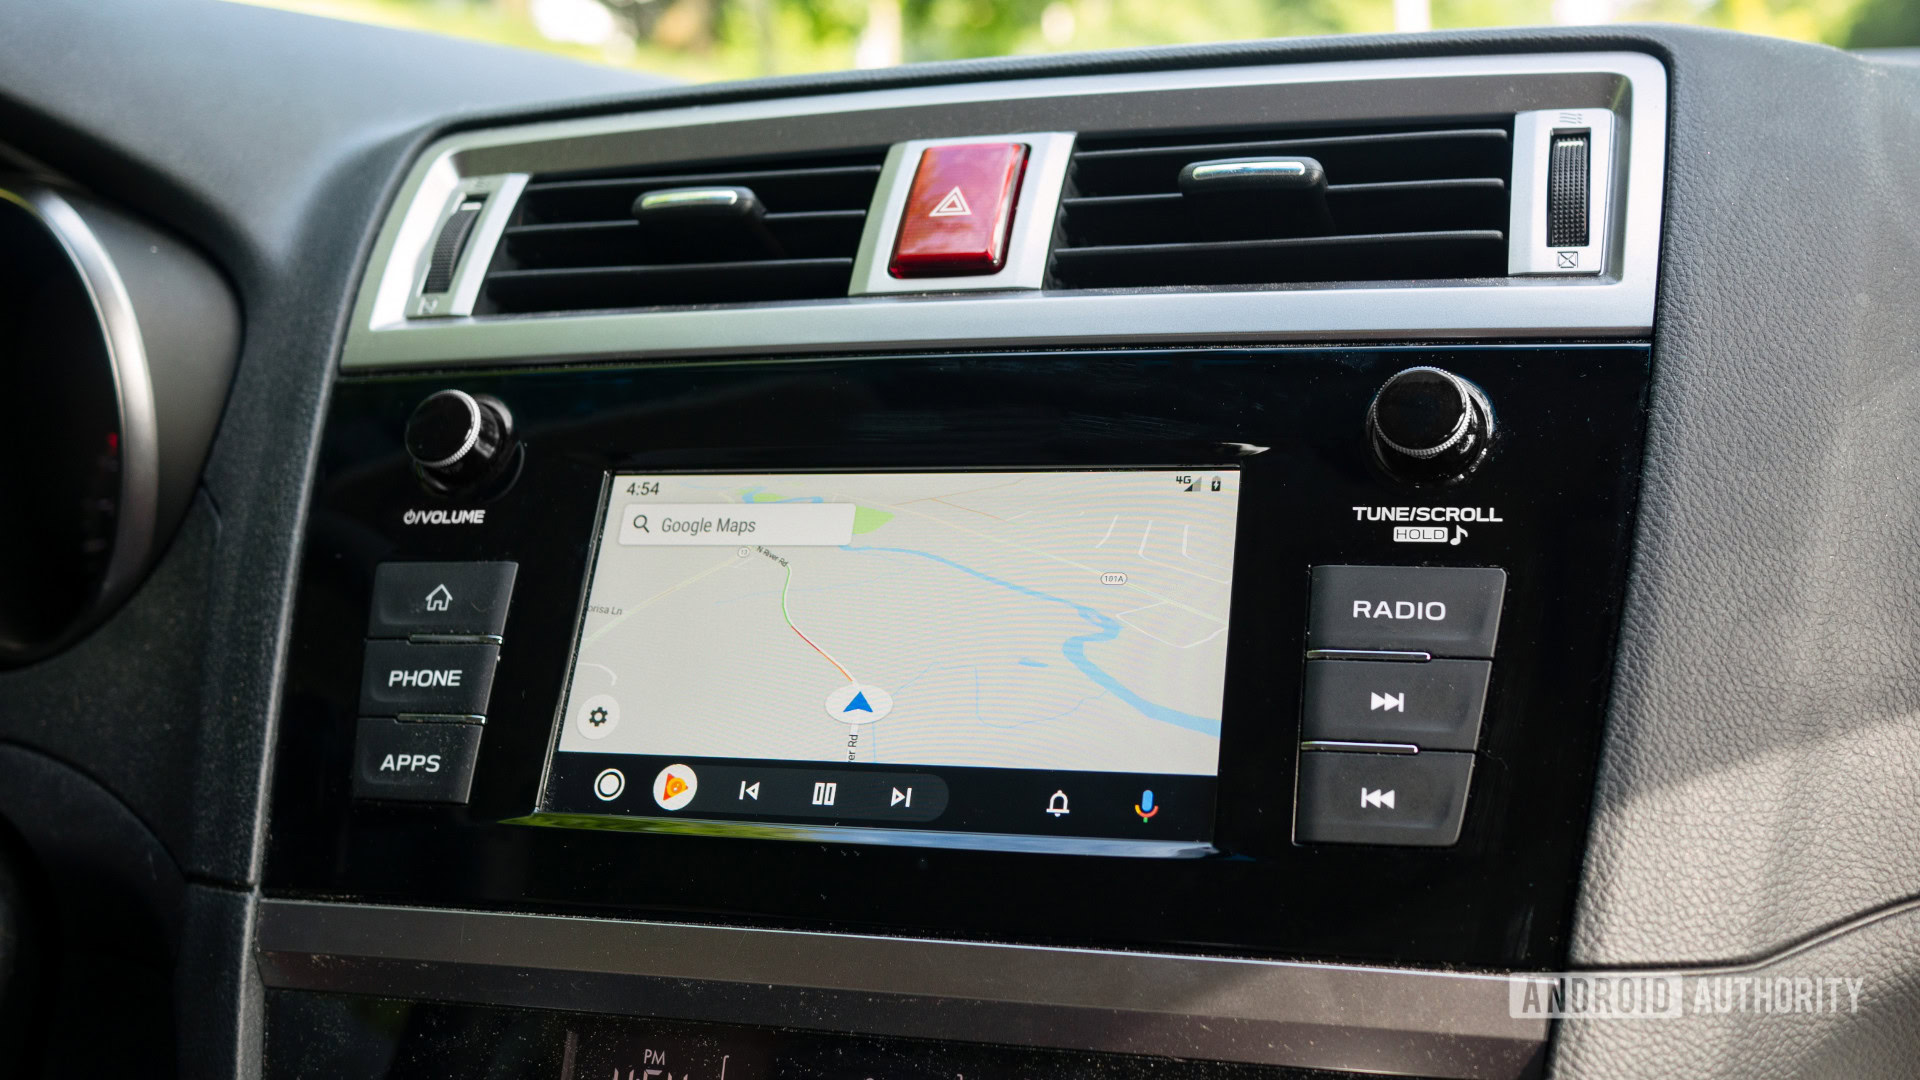 10 best Android Auto apps to get the most out of it - Android Authority